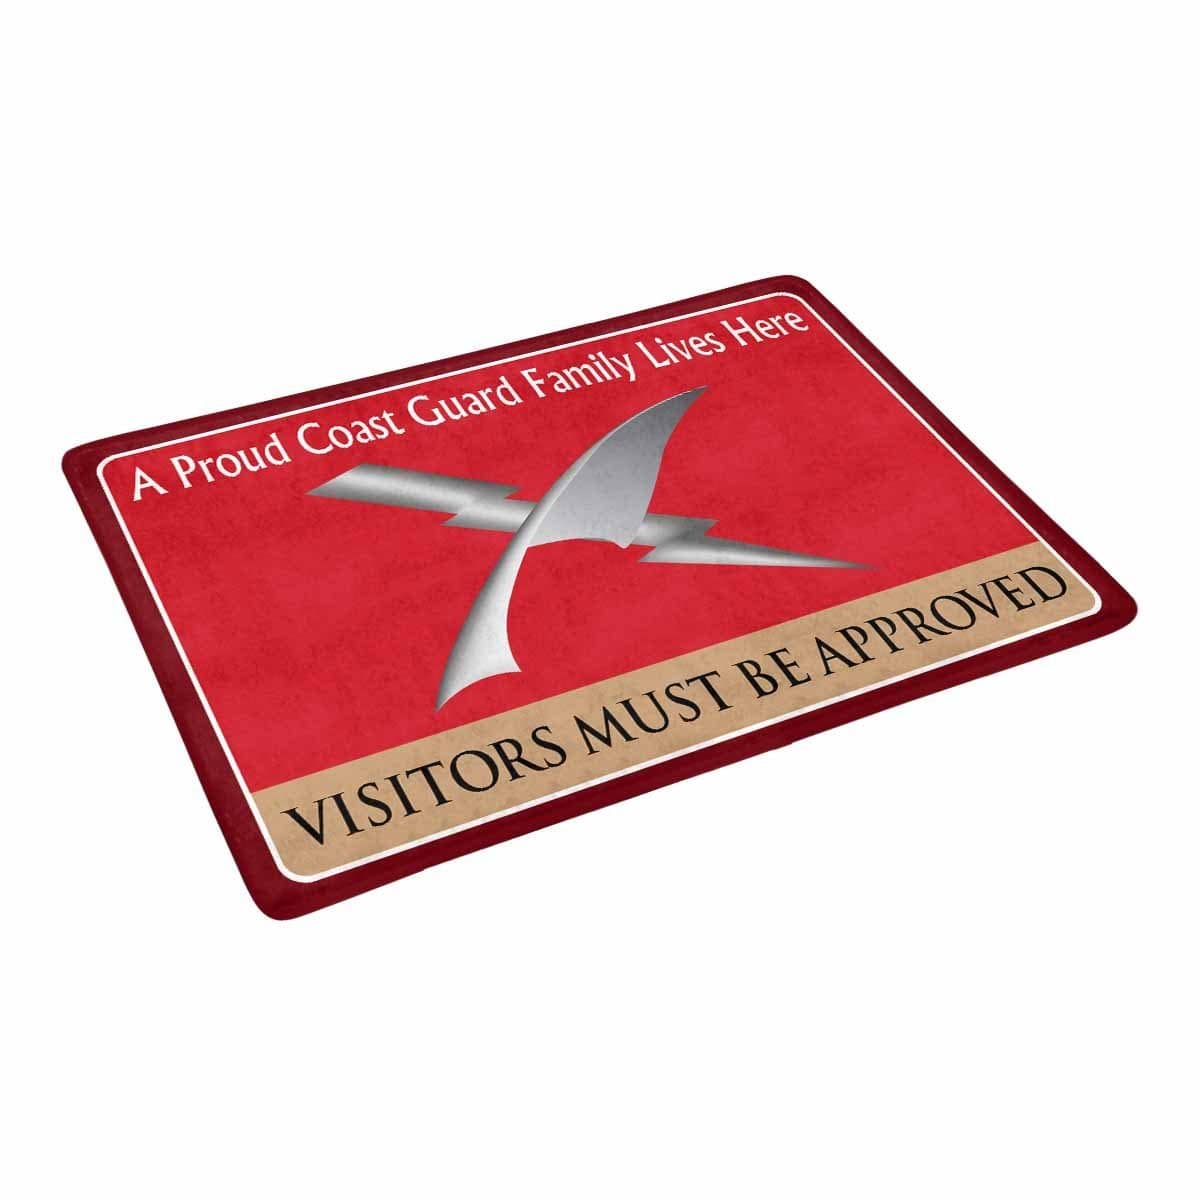 US Coast Guard Intelligence Specialist IS Logo Family Doormat - Visitors must be approved (23.6 inches x 15.7 inches)-Doormat-USCG-Rate-Veterans Nation